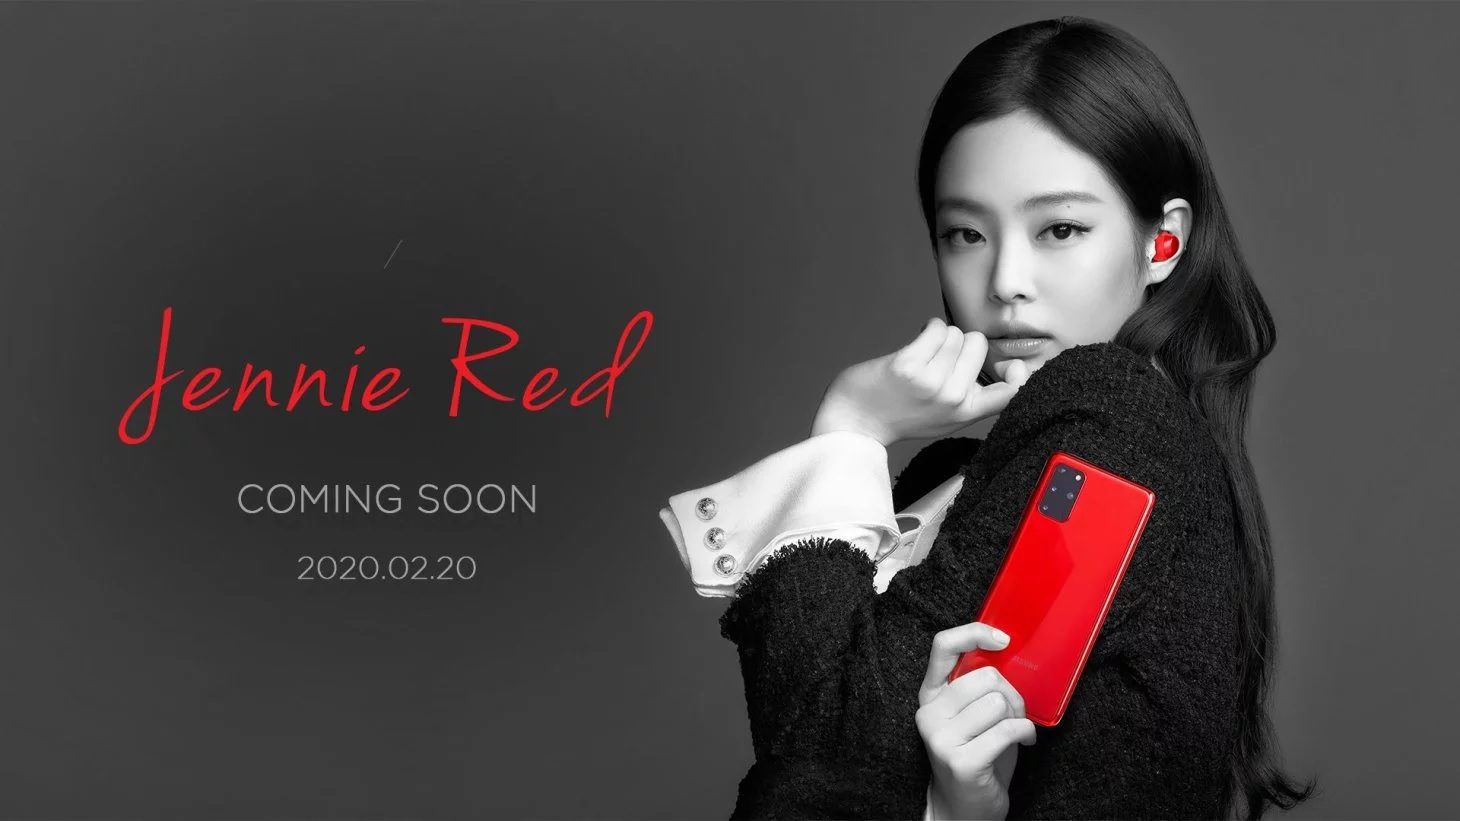 Samsung is selling a Blackpink branded Jenny Red Samsung Galaxy S20+ phone and Galaxy Buds+ bundle